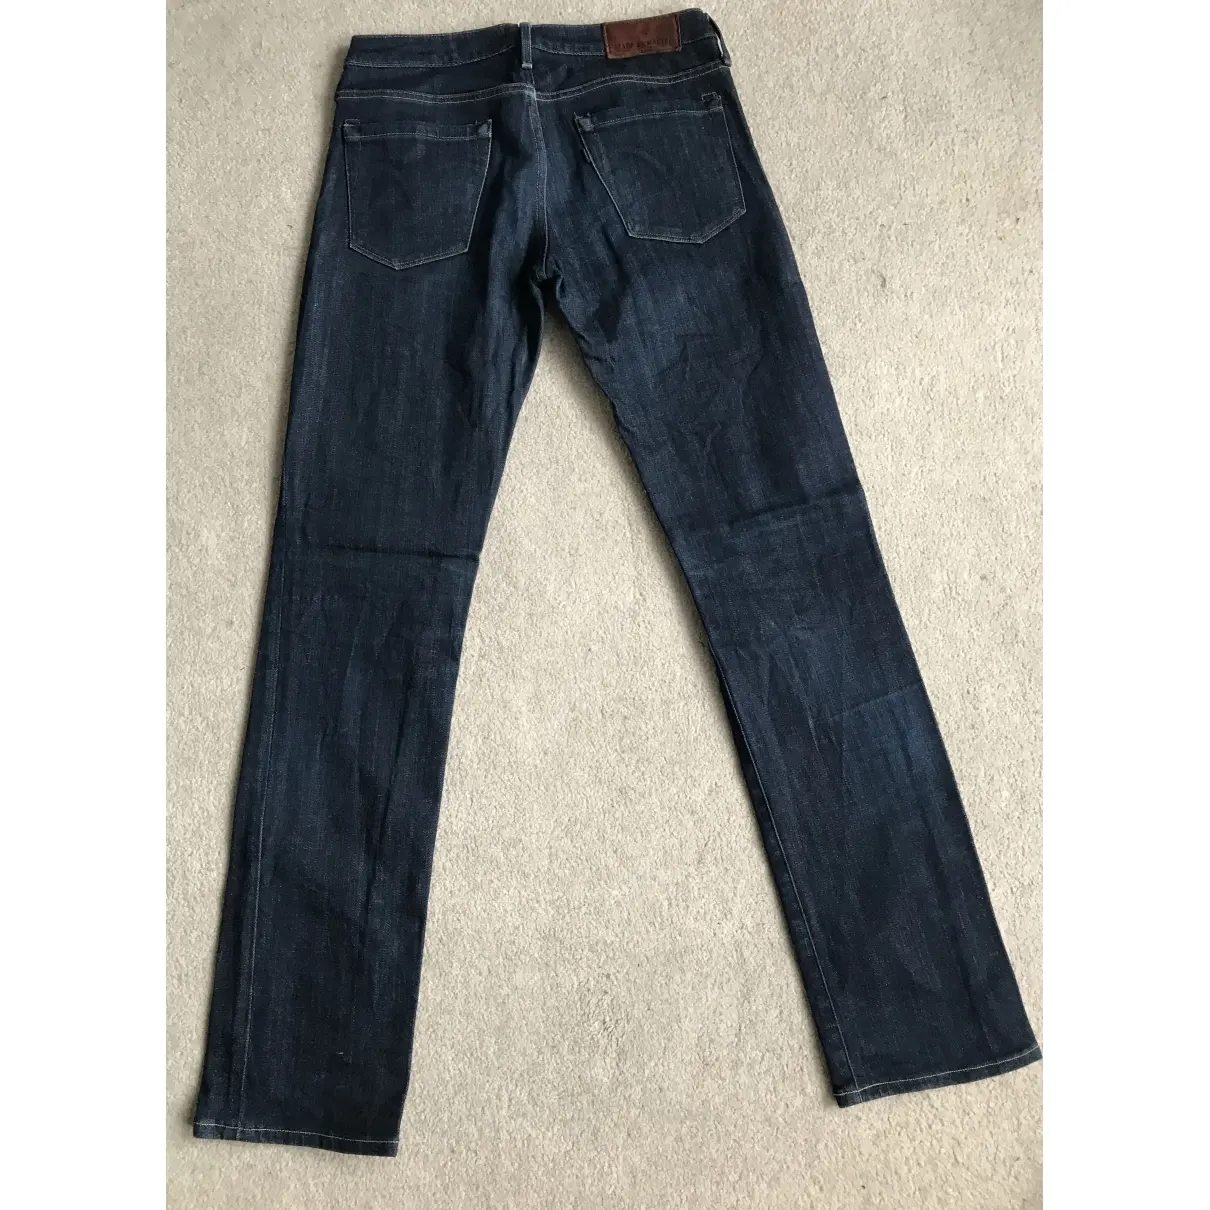 Levi's Made & Crafted Straight jeans for sale